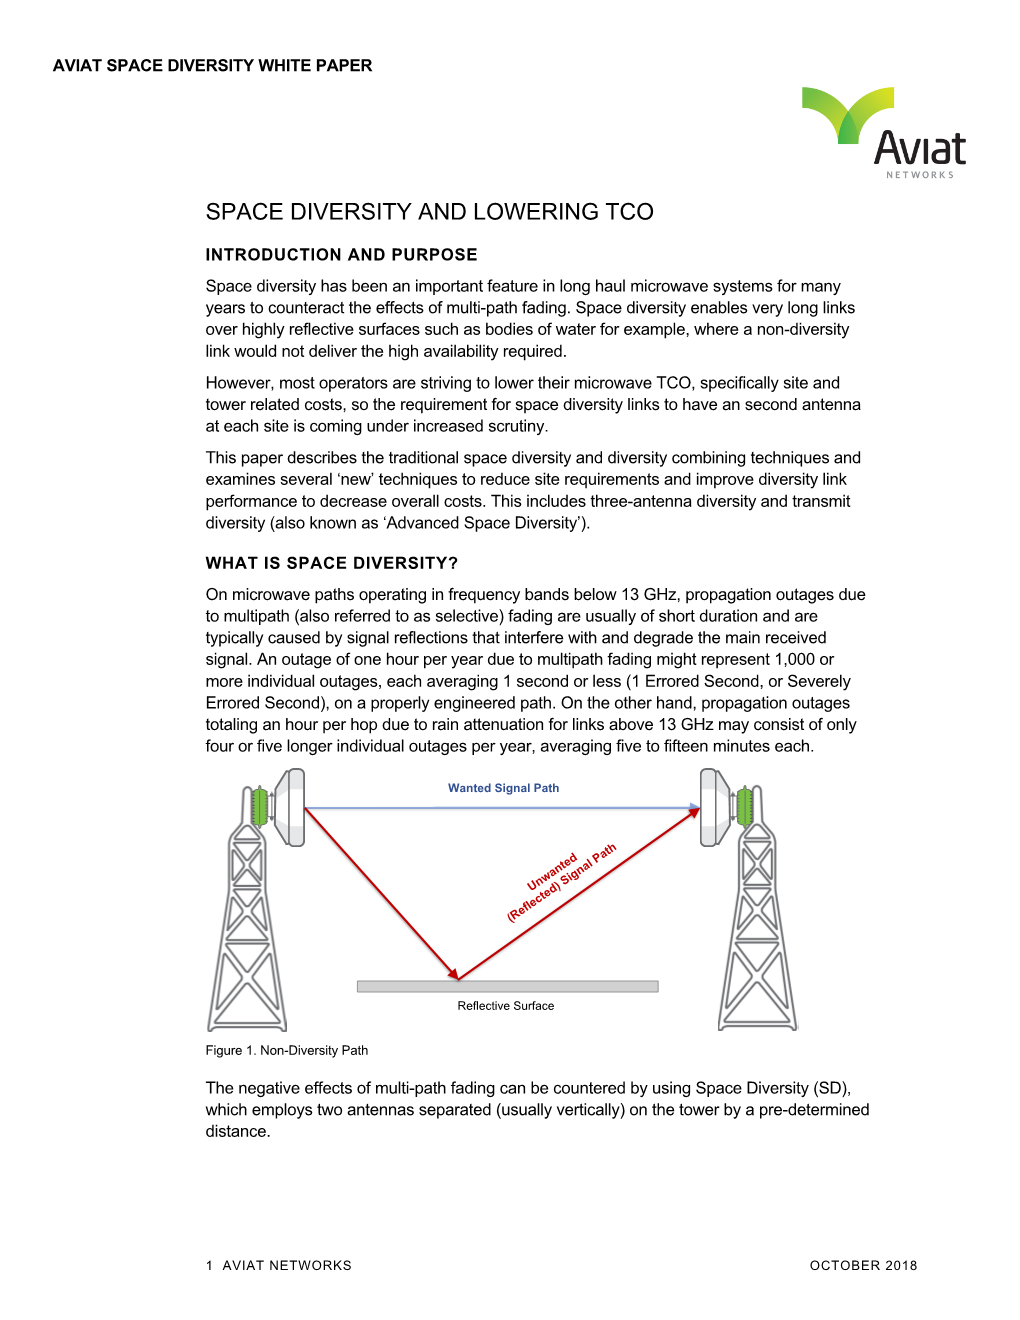 Space Diversity and Lowering Tco